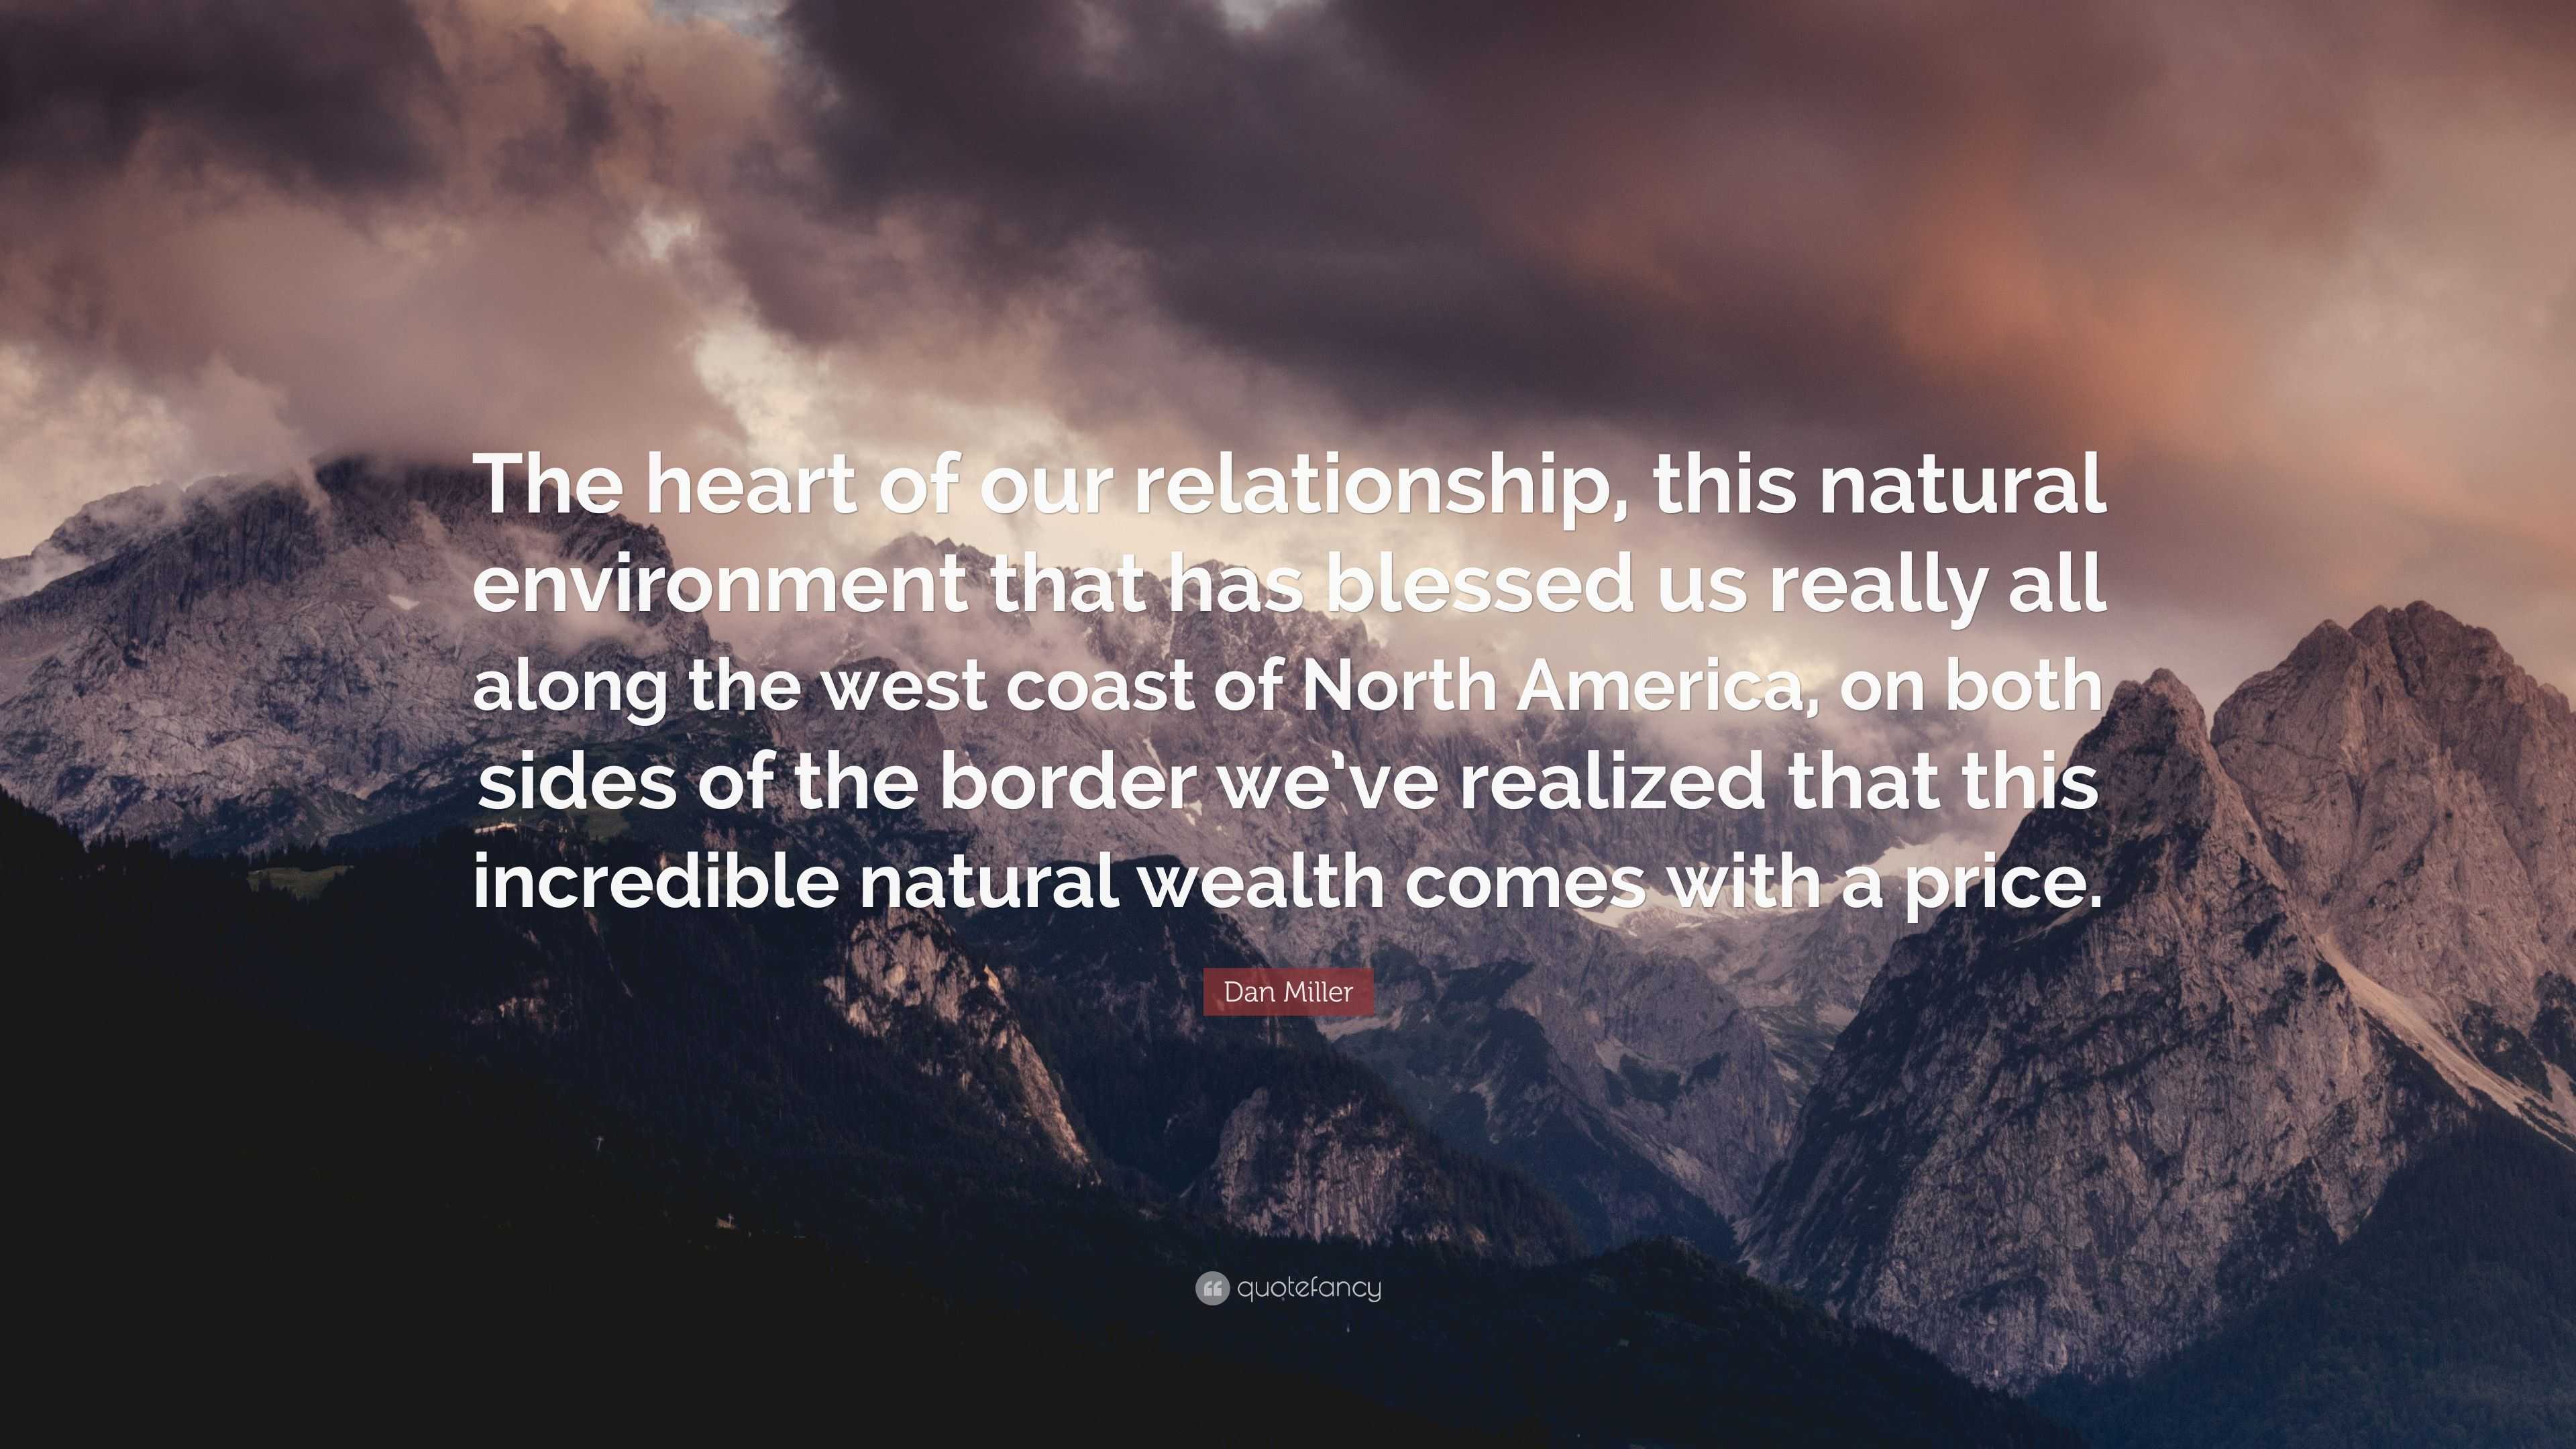 Dan Miller Quote: “The heart of our relationship, this natural environment that has blessed us along the west coast of North Ame...”